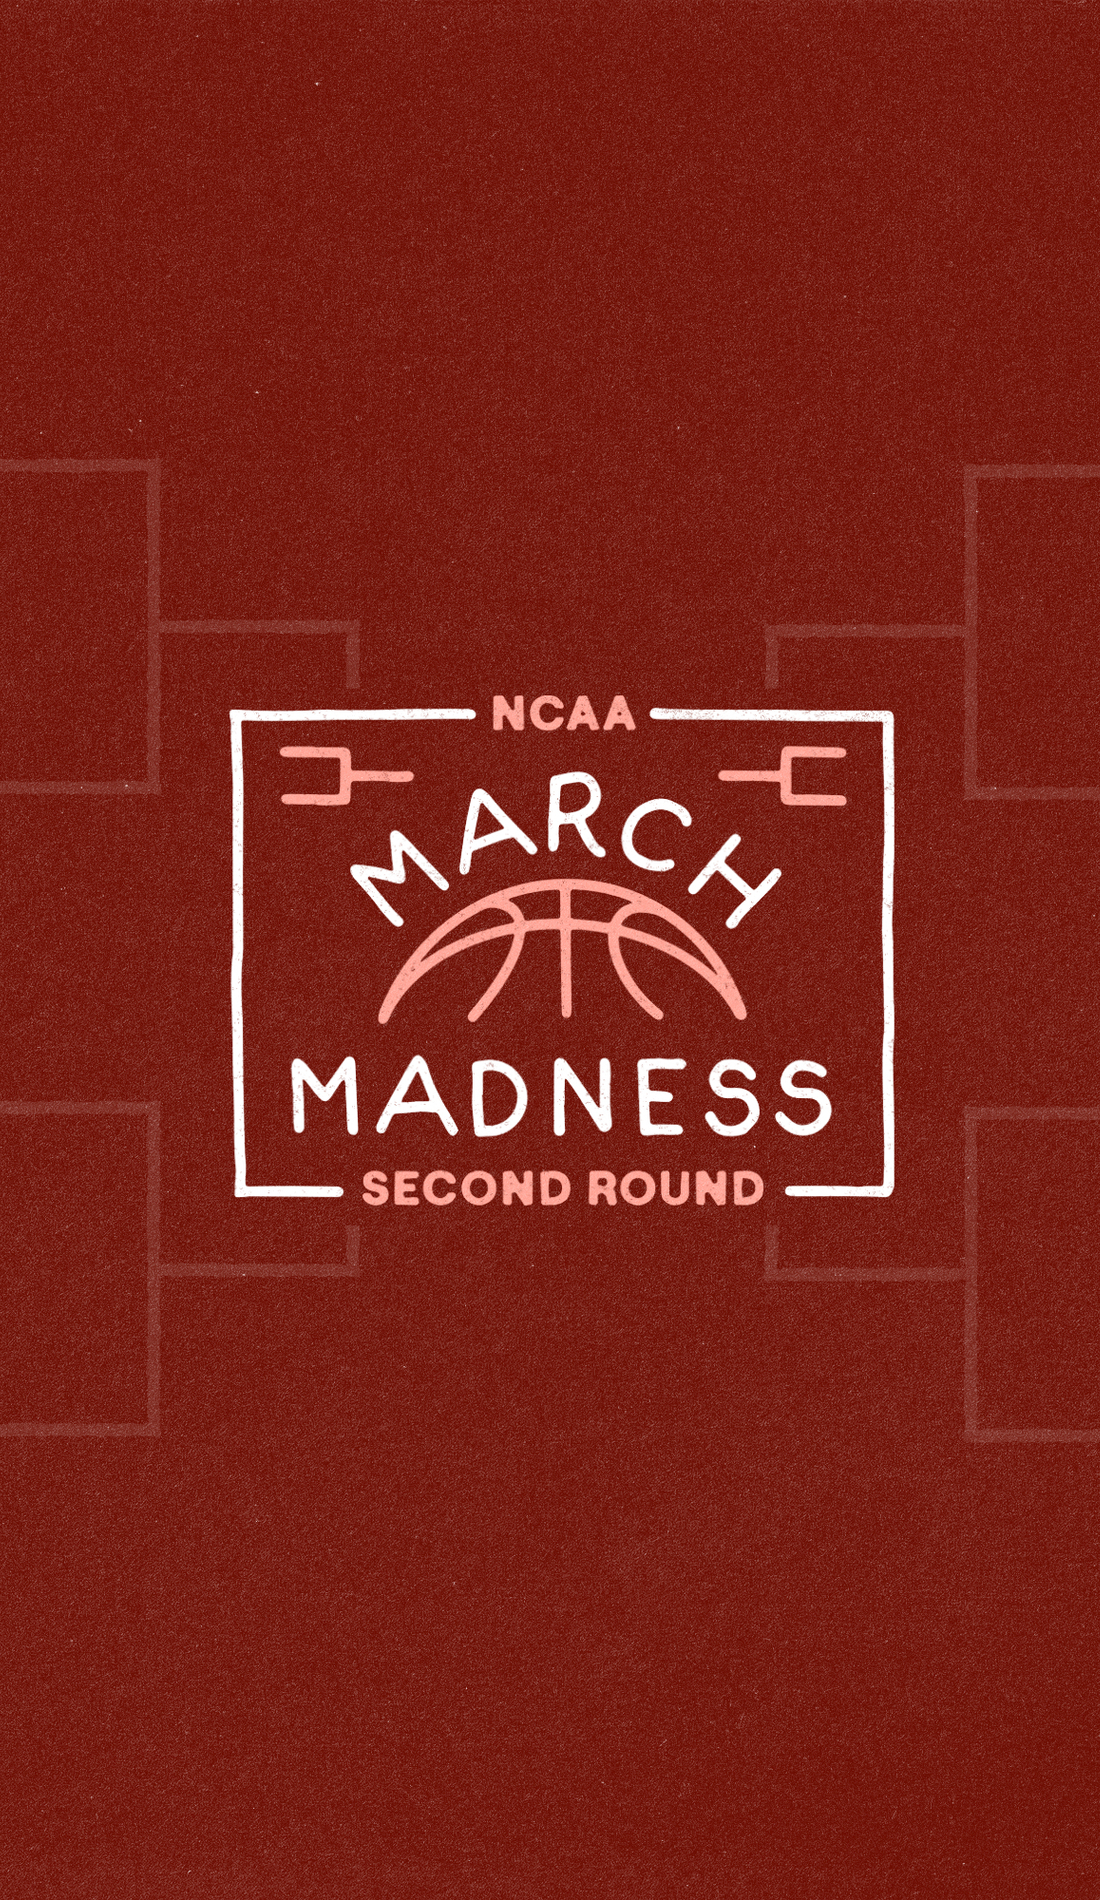 A NCAA Tournament Fort Worth live event